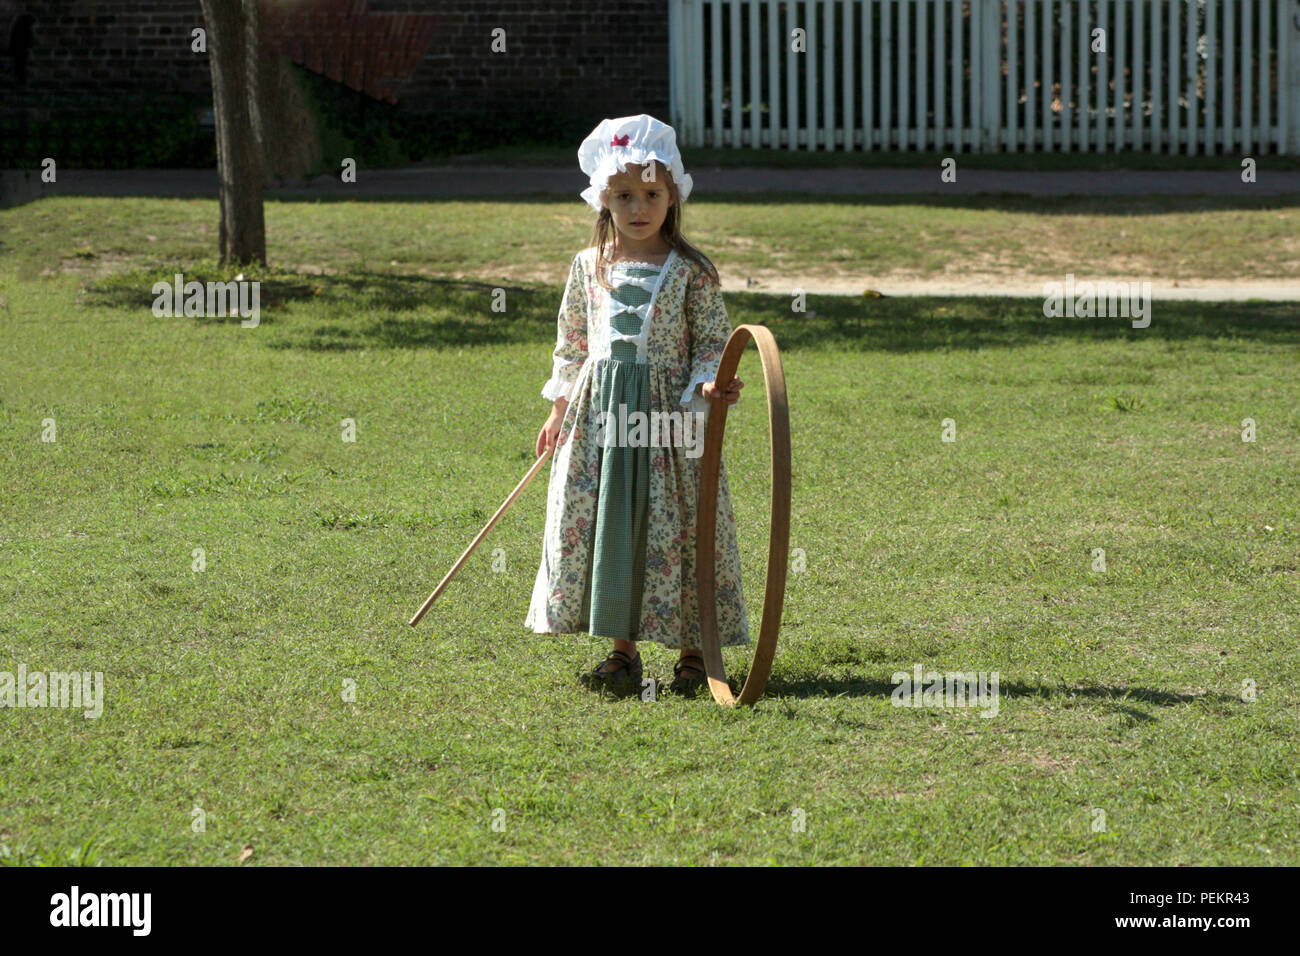 Little child playing hoop and stick in Colonial Williamsburg, Virginia Stock Photo